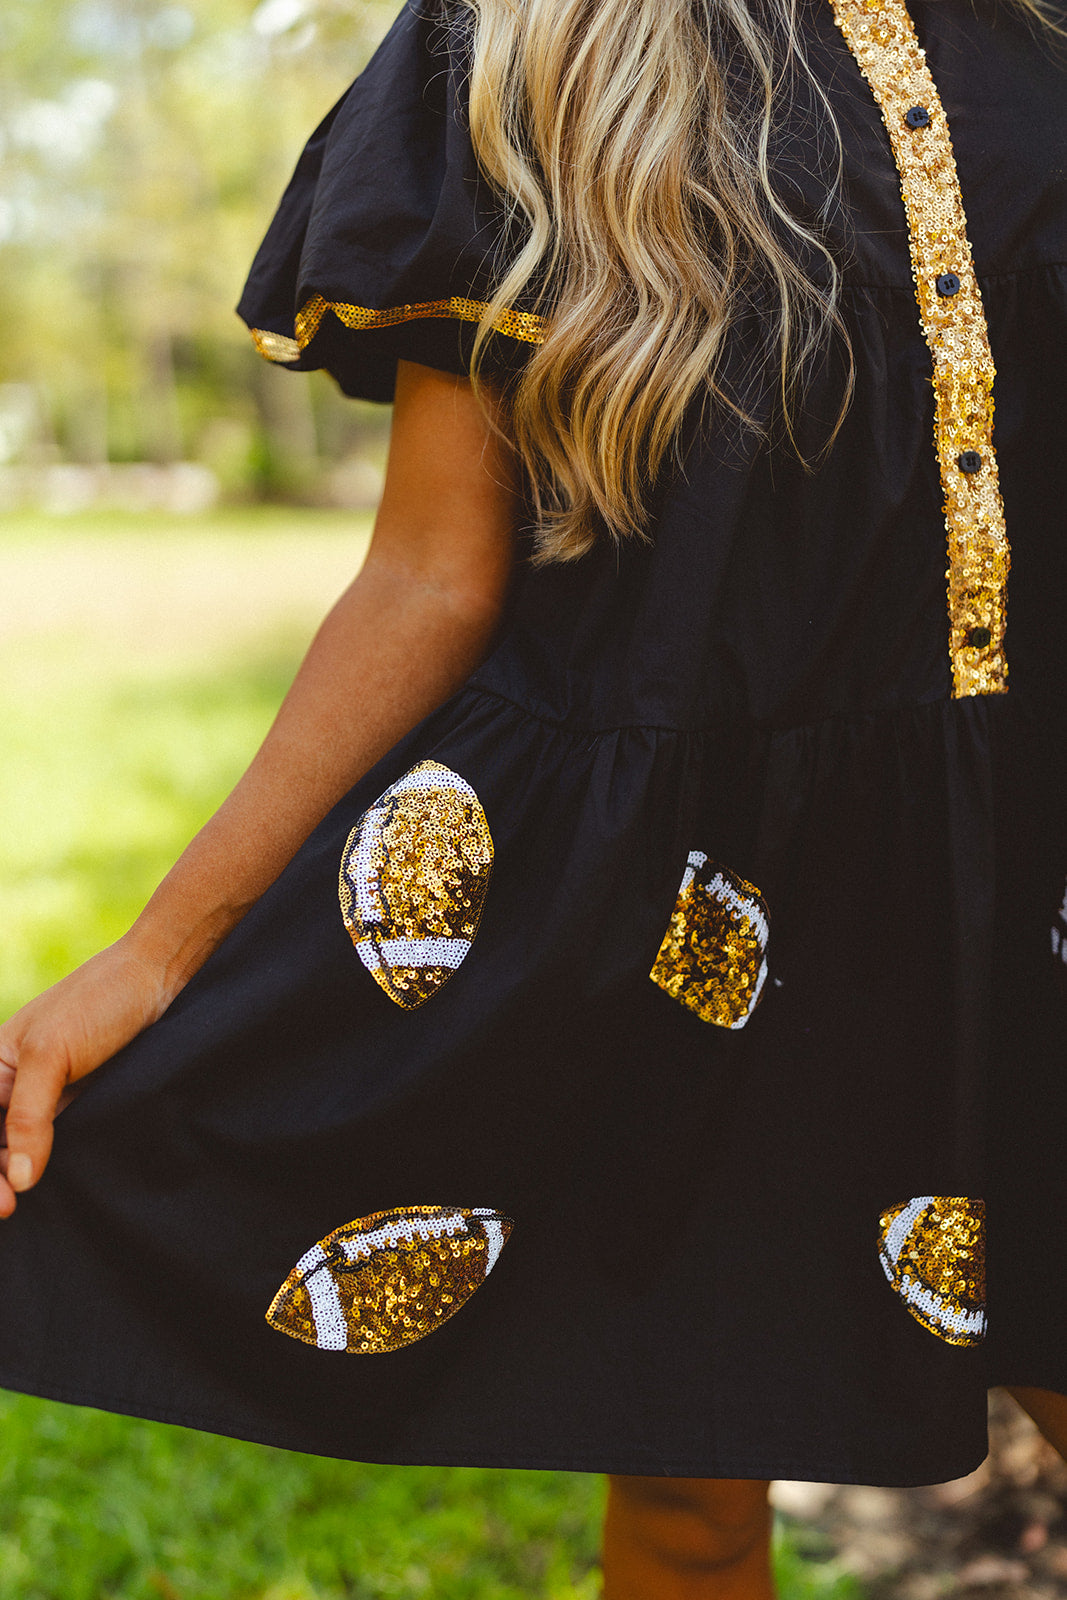 Black and Gold Sequin Football Babydoll Button Detail Dress